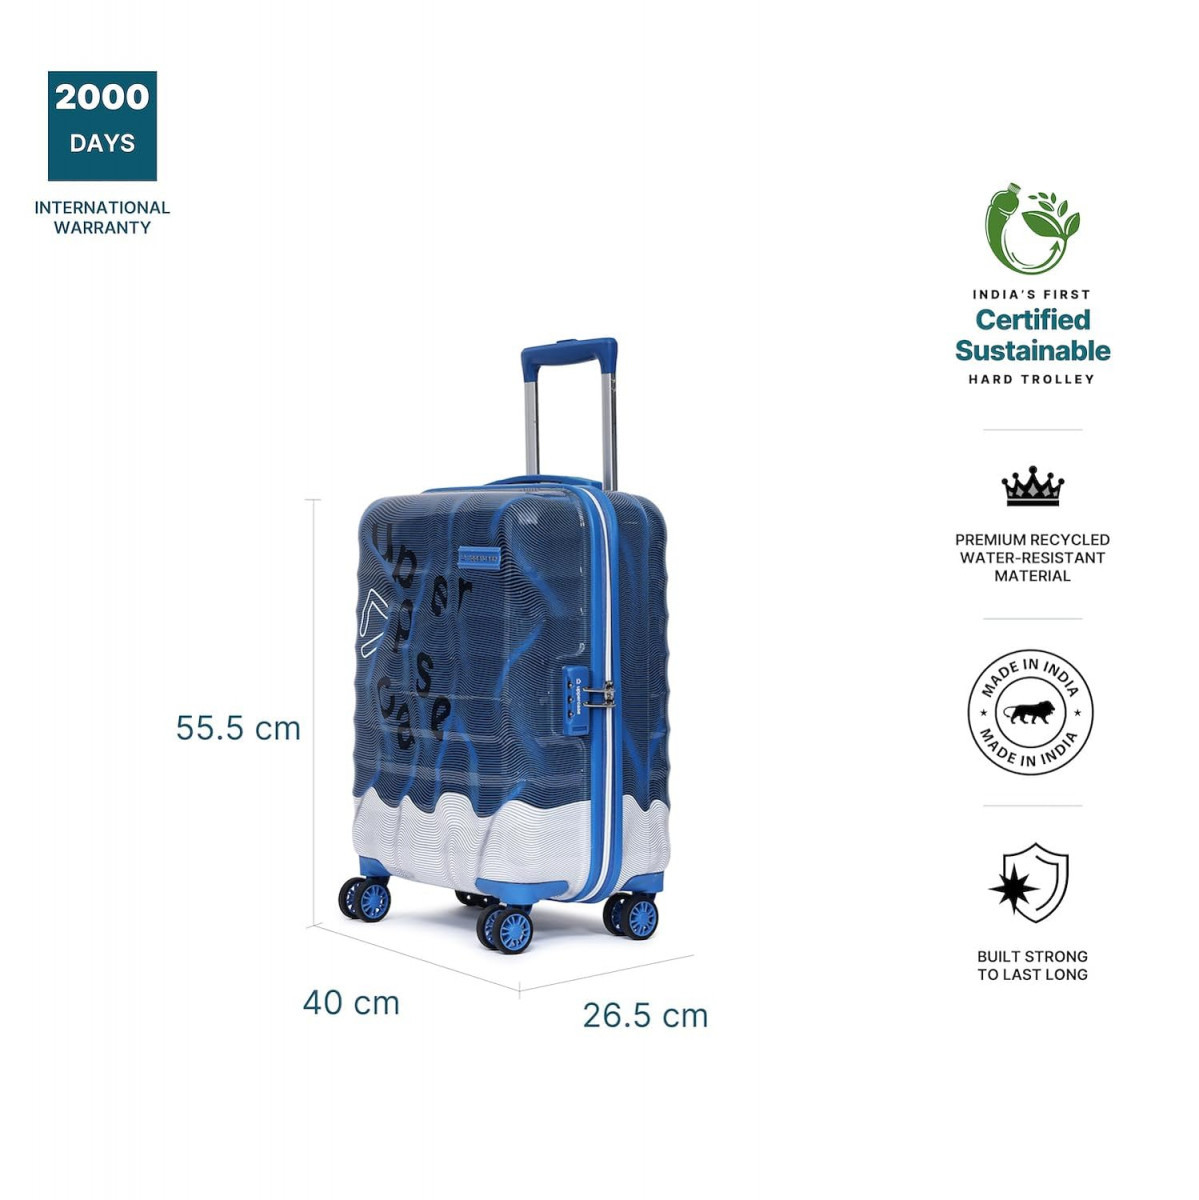 uppercase Ripple 56CmsCabin Trolley BagHardsided Polycarbonate Printed LuggageCombination LockSustainable 8 Wheel SpeedWheel Suitcase For Men And Women2000 Days WarrantyBlue555 Centimeters